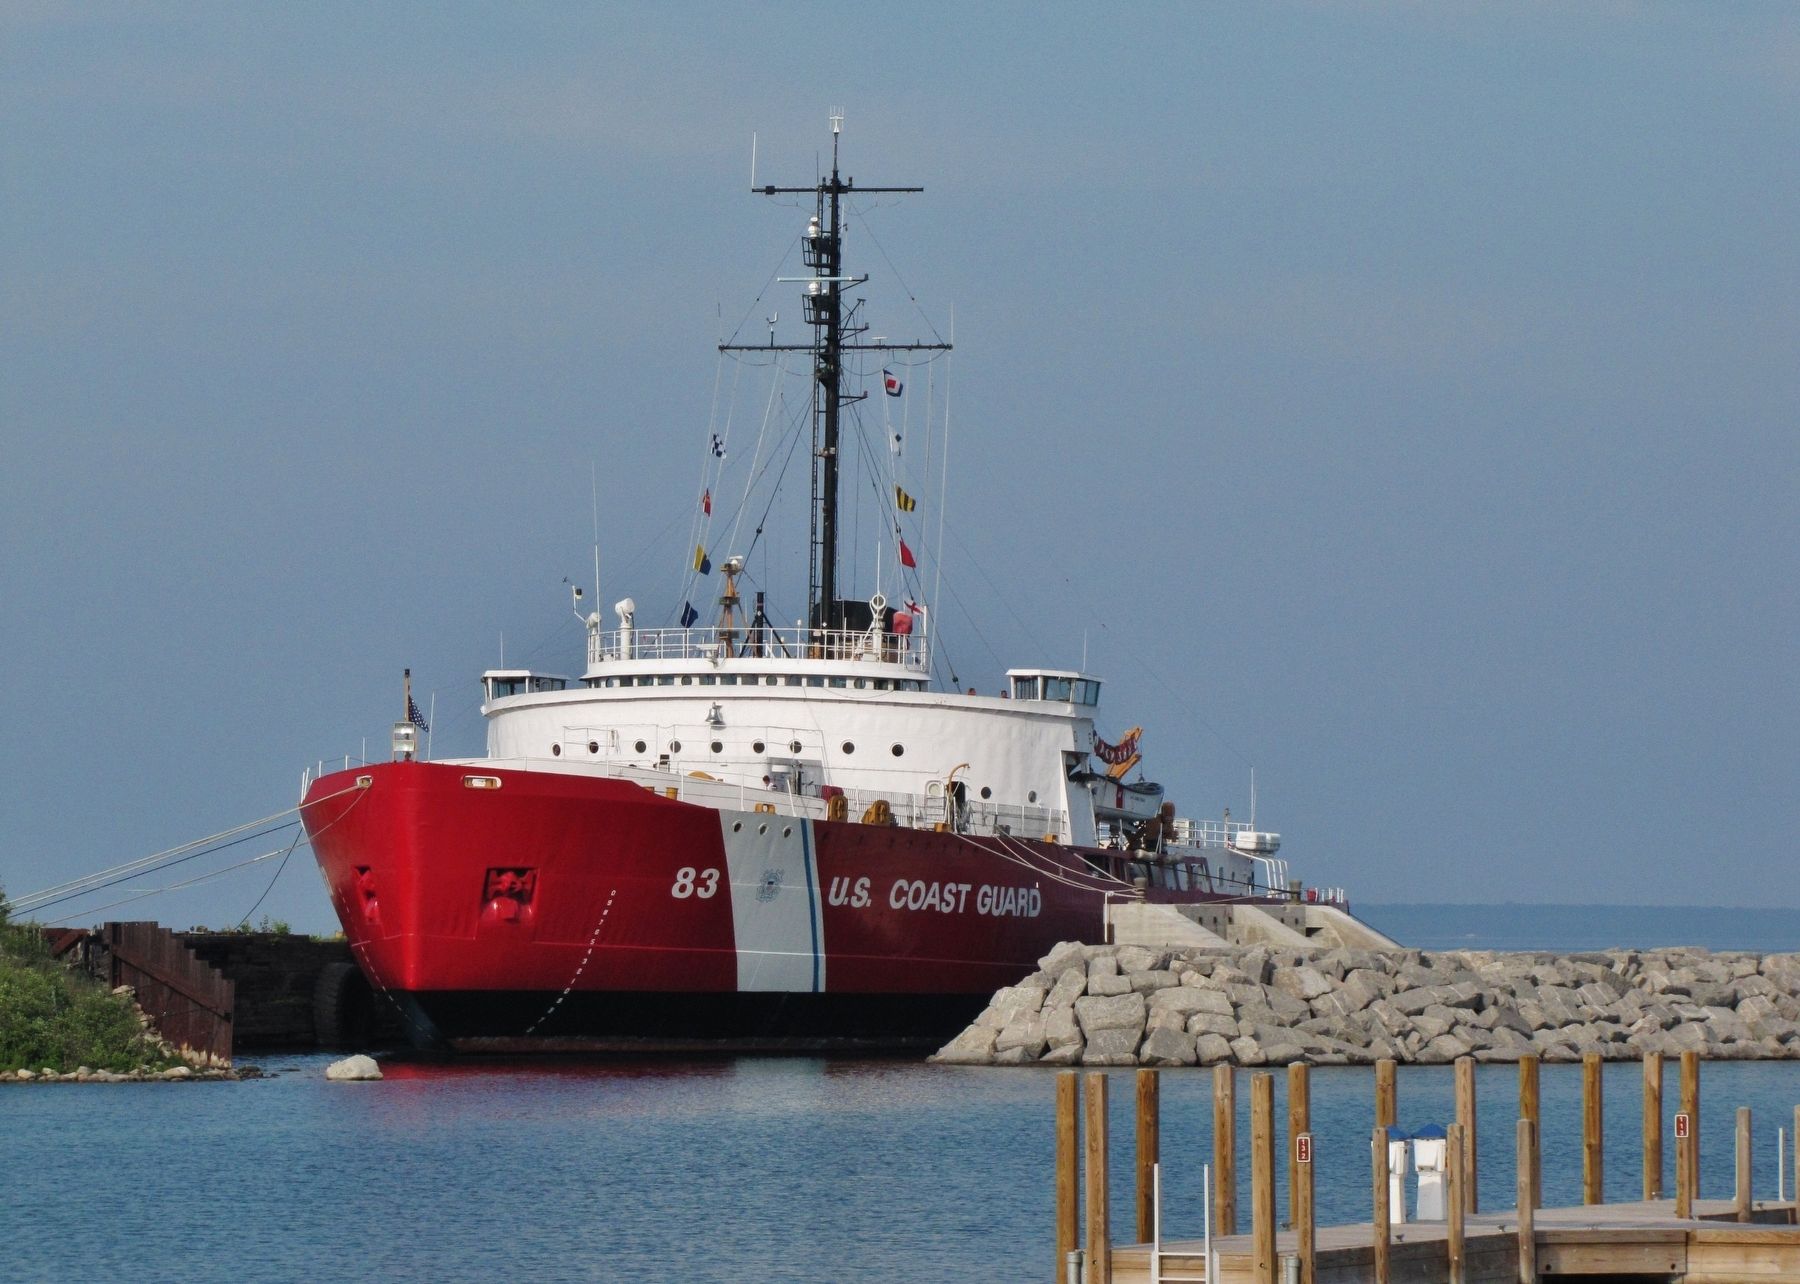 USCG Cutter <i>Mackinaw</i> WAGB 83 (<i>located east of marker, beside the old railroad dock</i>) image. Click for full size.